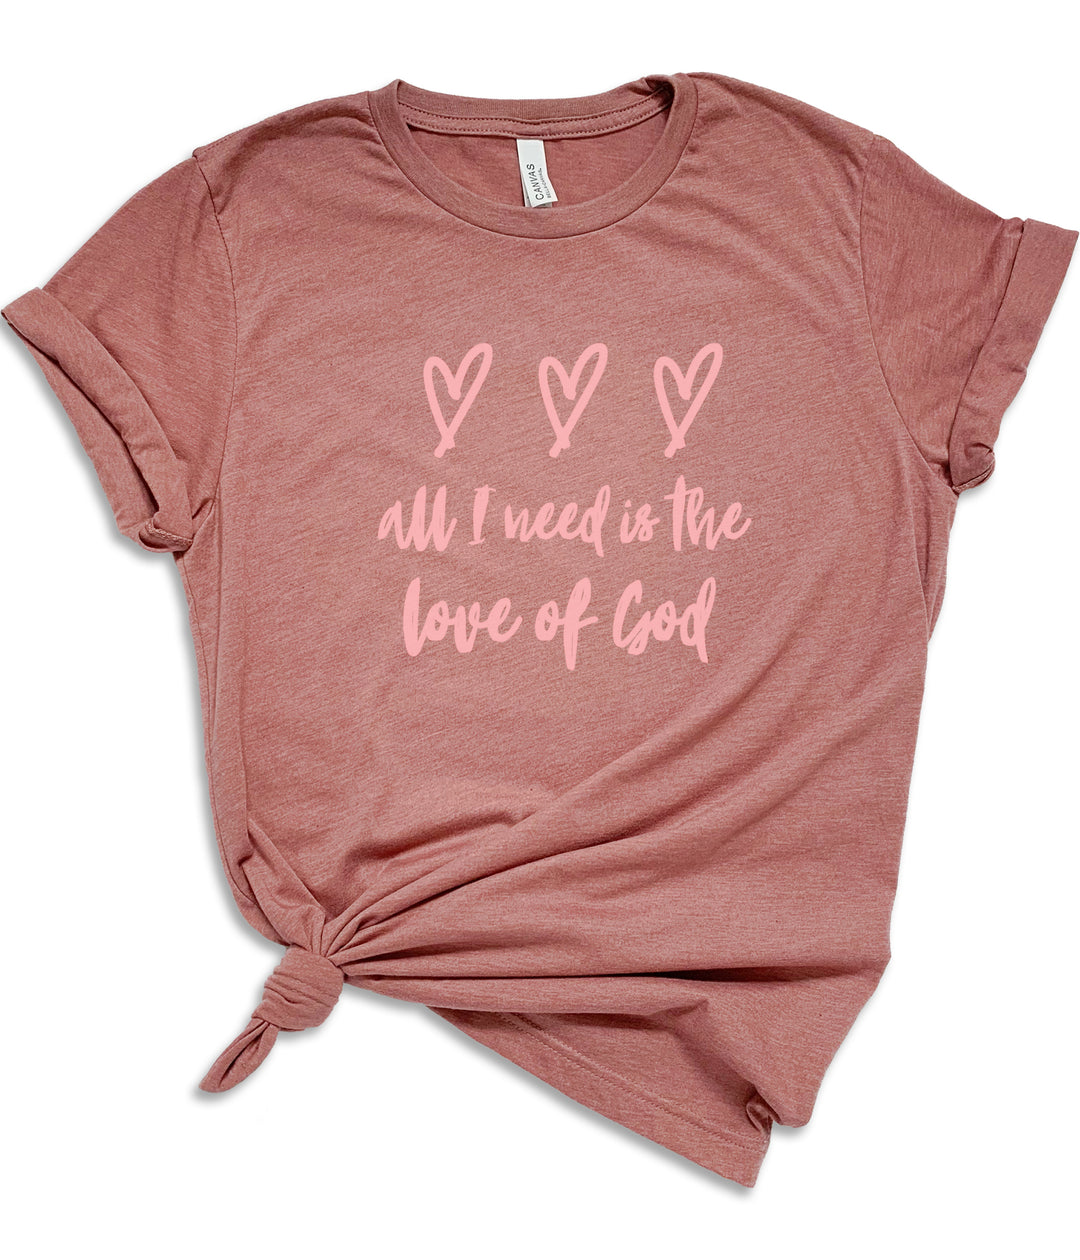 All I Need Is The Love Of God - Unisex Crew-Neck Tee